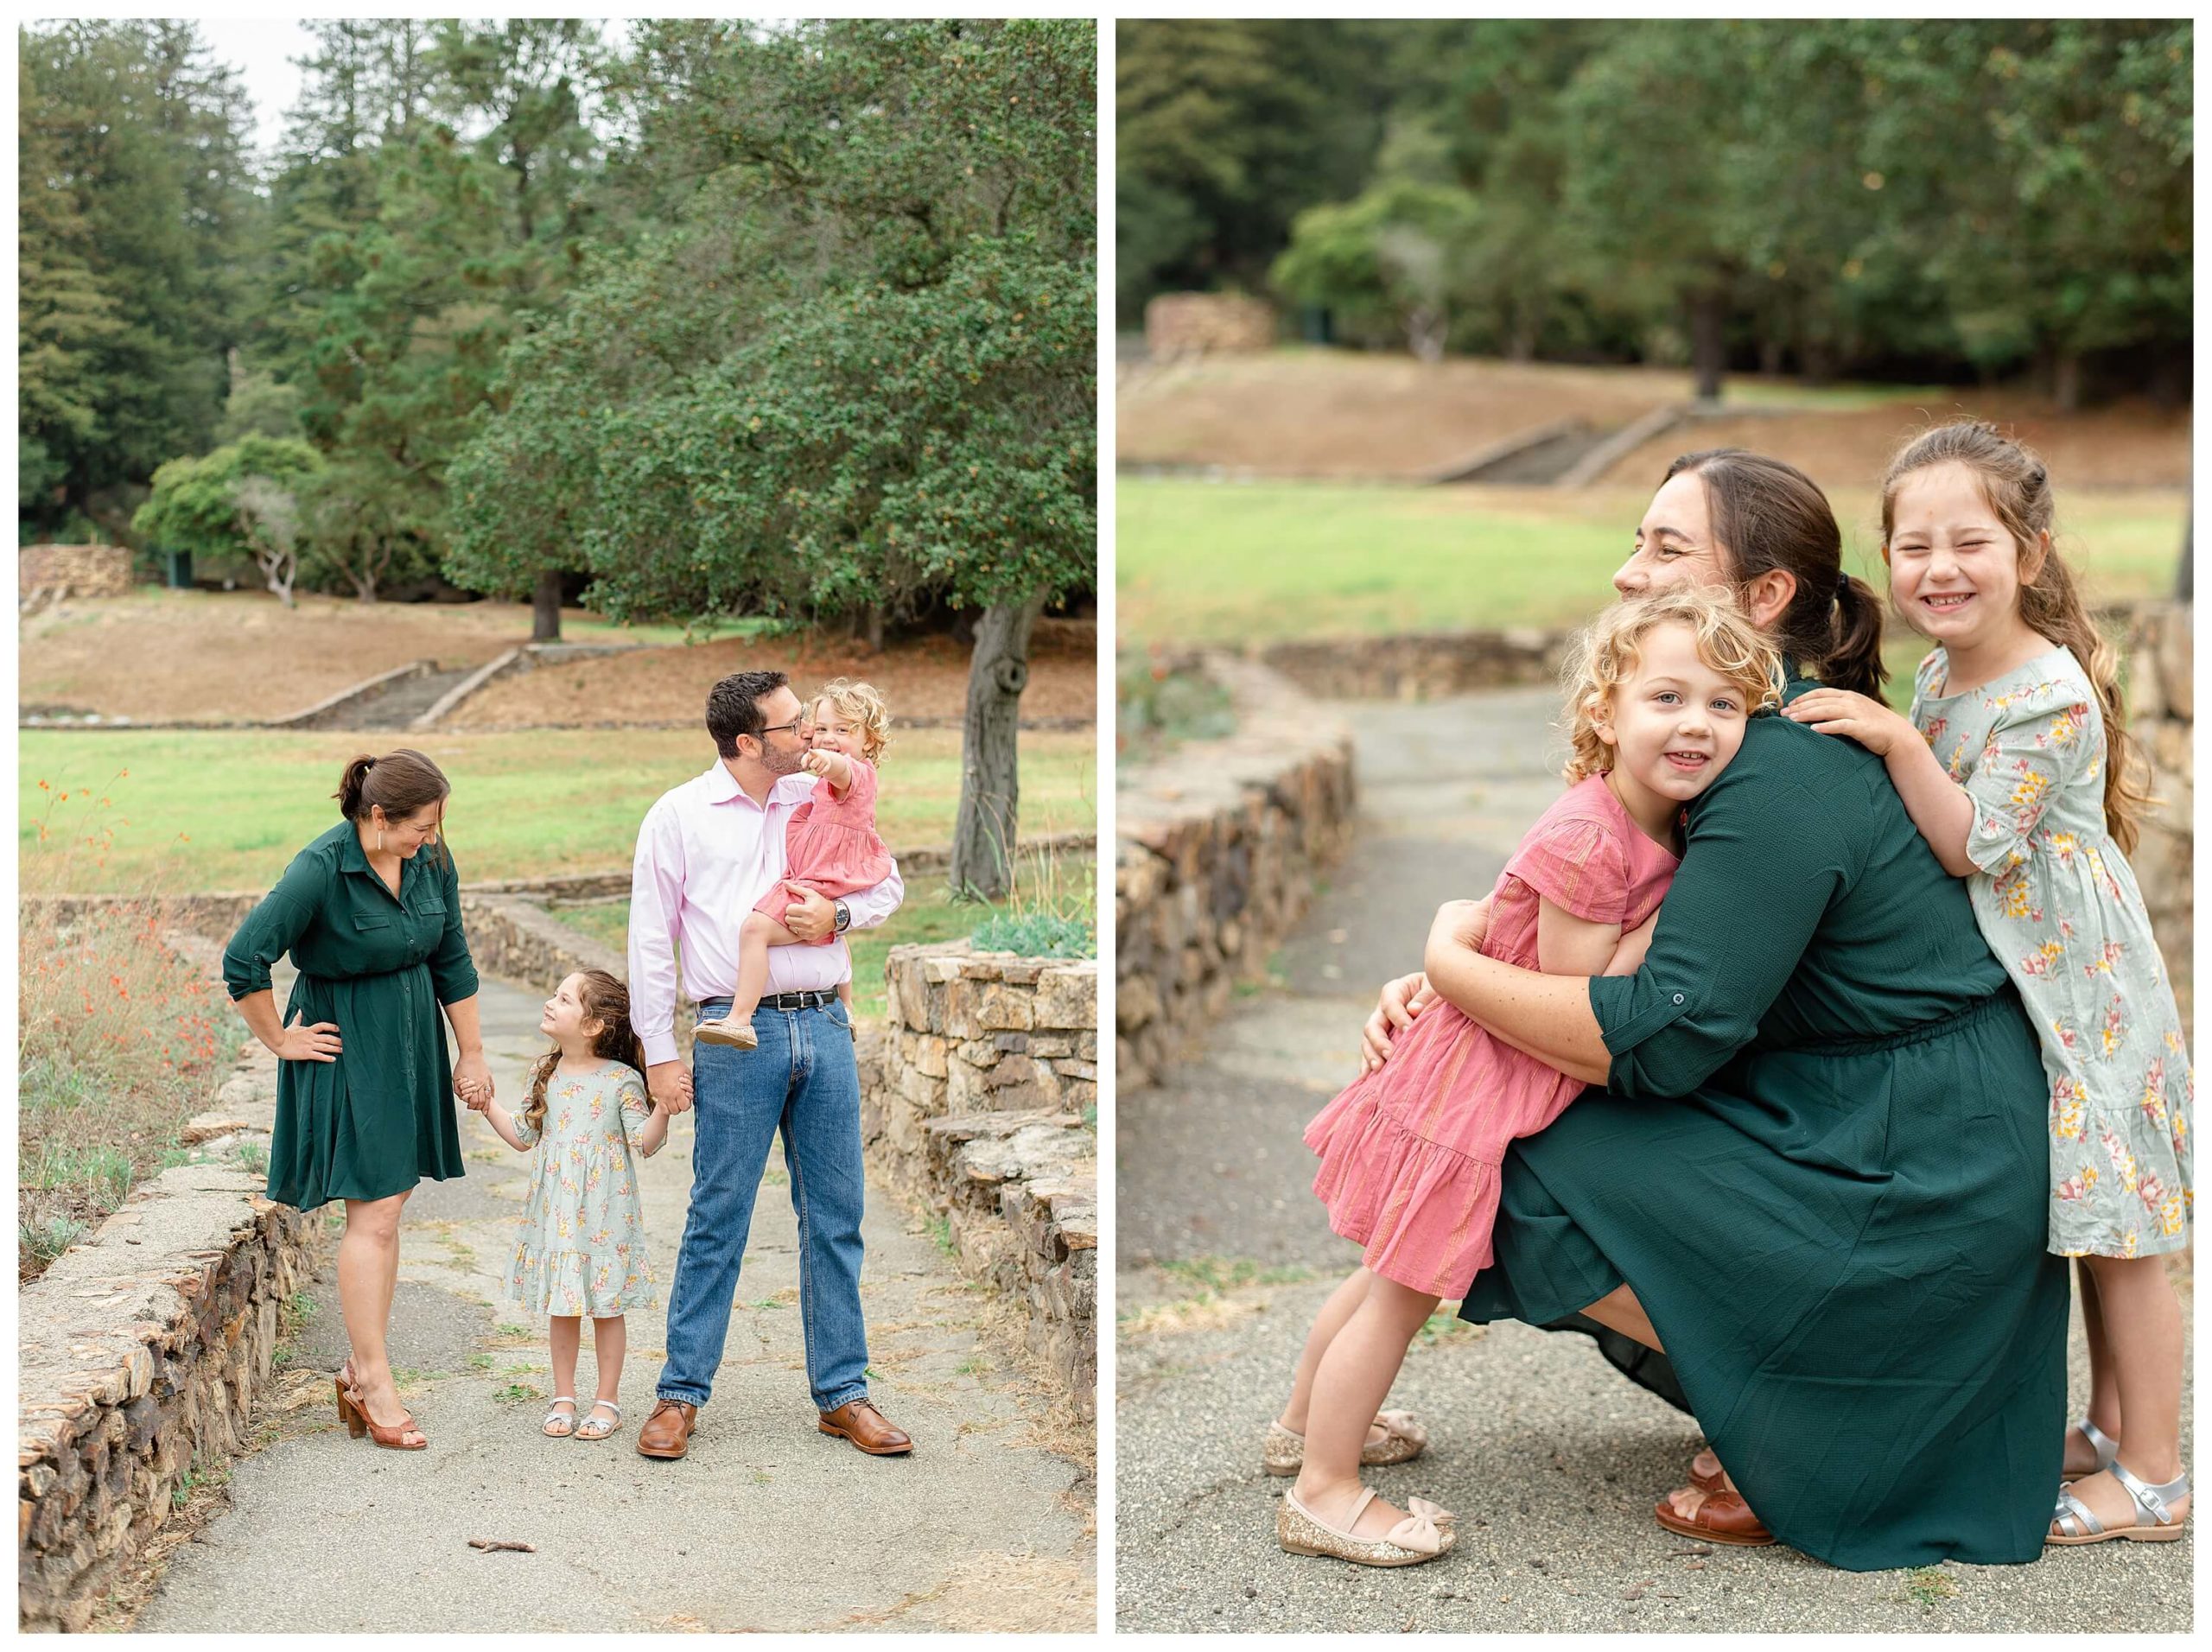 Left: A family of four stands on a pathway in a park. The father is holding a little girl who is pointing at the camera and laughing. Both parents hold the older daughter's hands as the mother smiles at her. Right: A mother bends down to hug her small daughter as her older daughter cuddles up behind her.